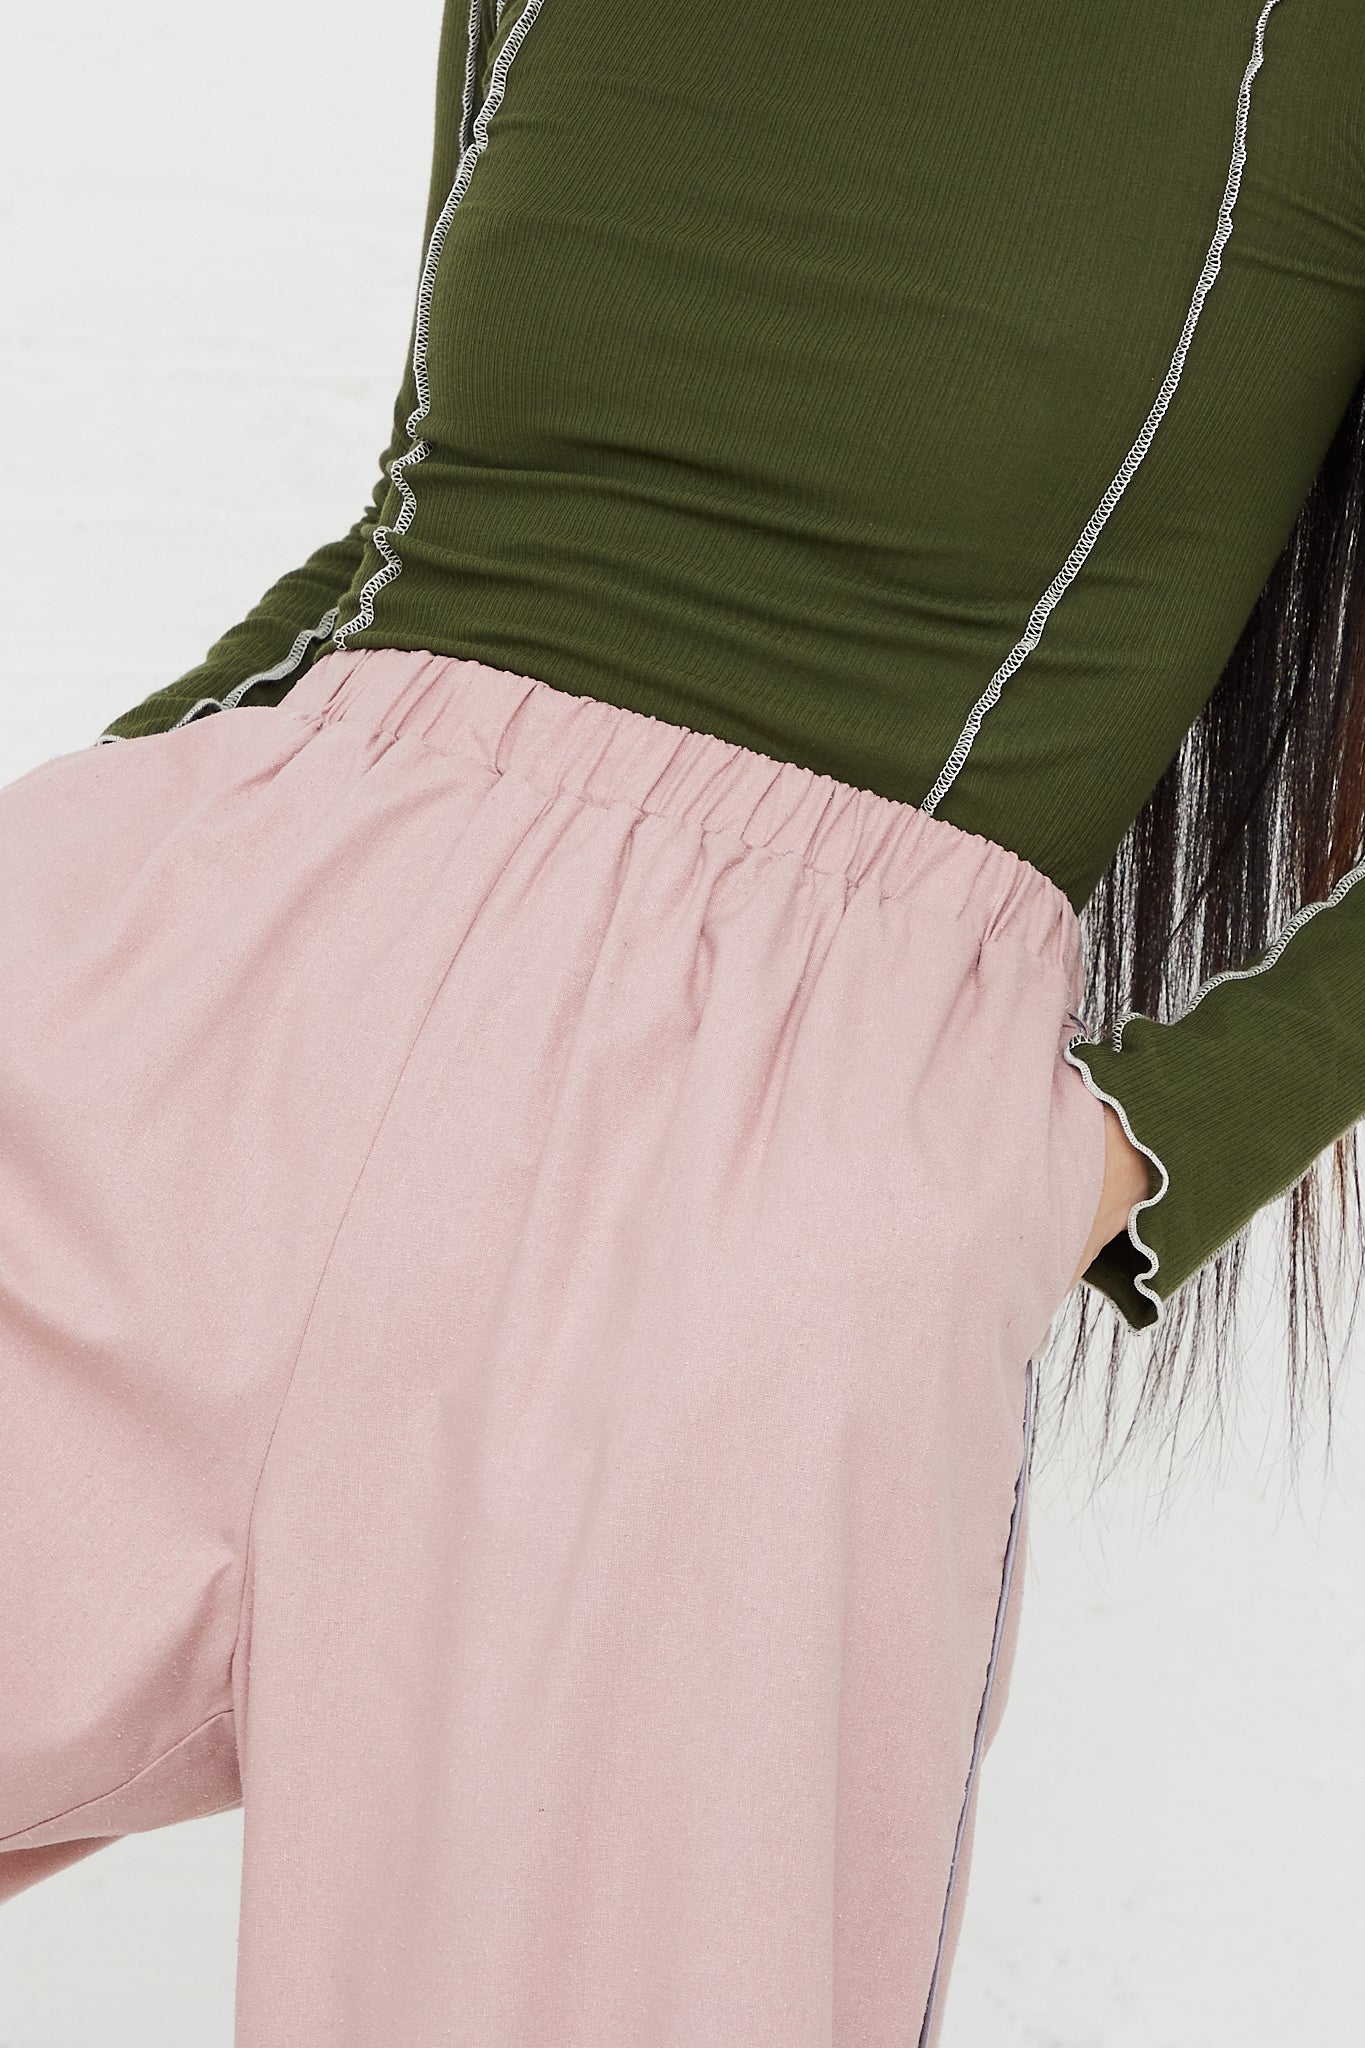 Lesie High Waist Pant in Pompei Rose by Baserange for Oroboro Front Upclose